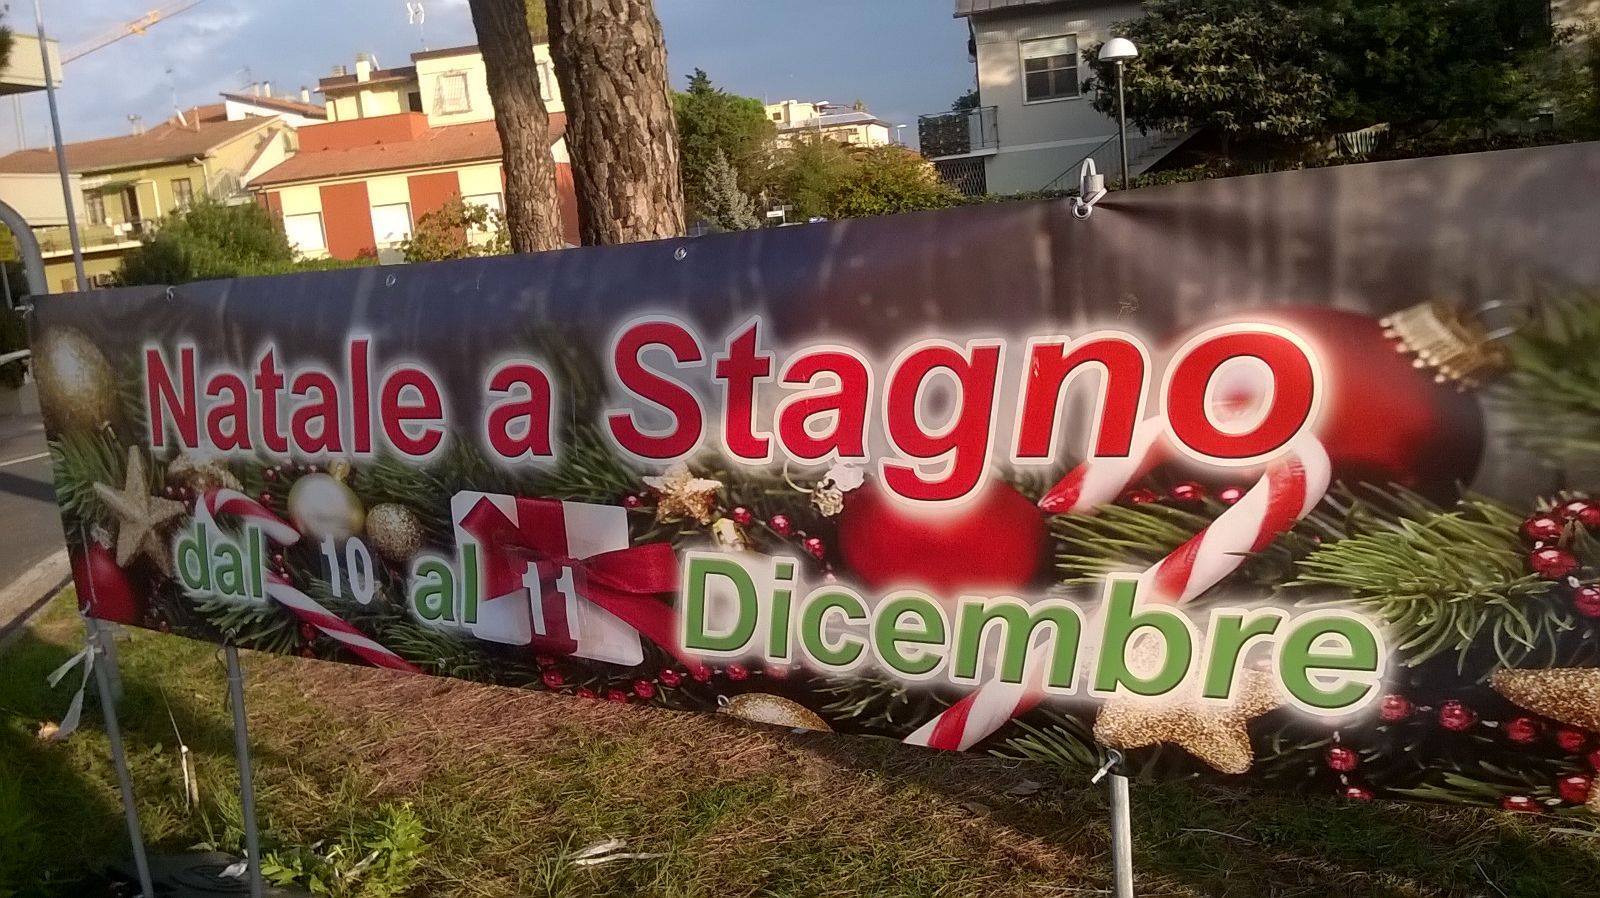 NATALE A STAGNO, MARCIS: «RENDEREMO IL PAESE BELLISSIMO»